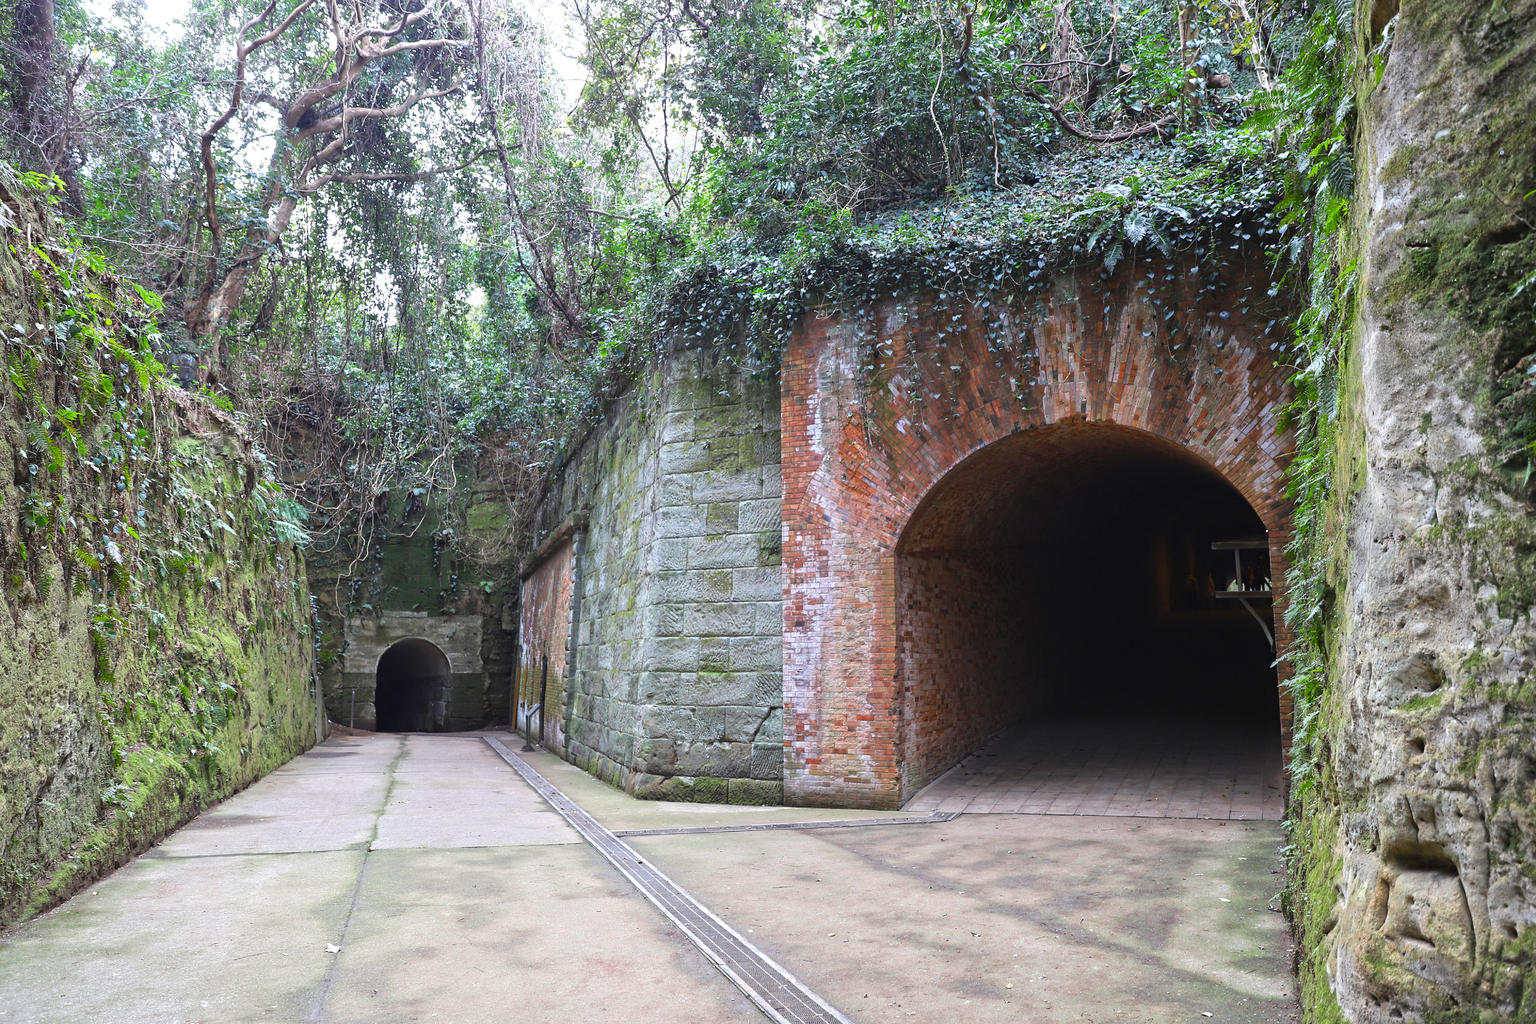 Brick in the tunnel of Sarushima